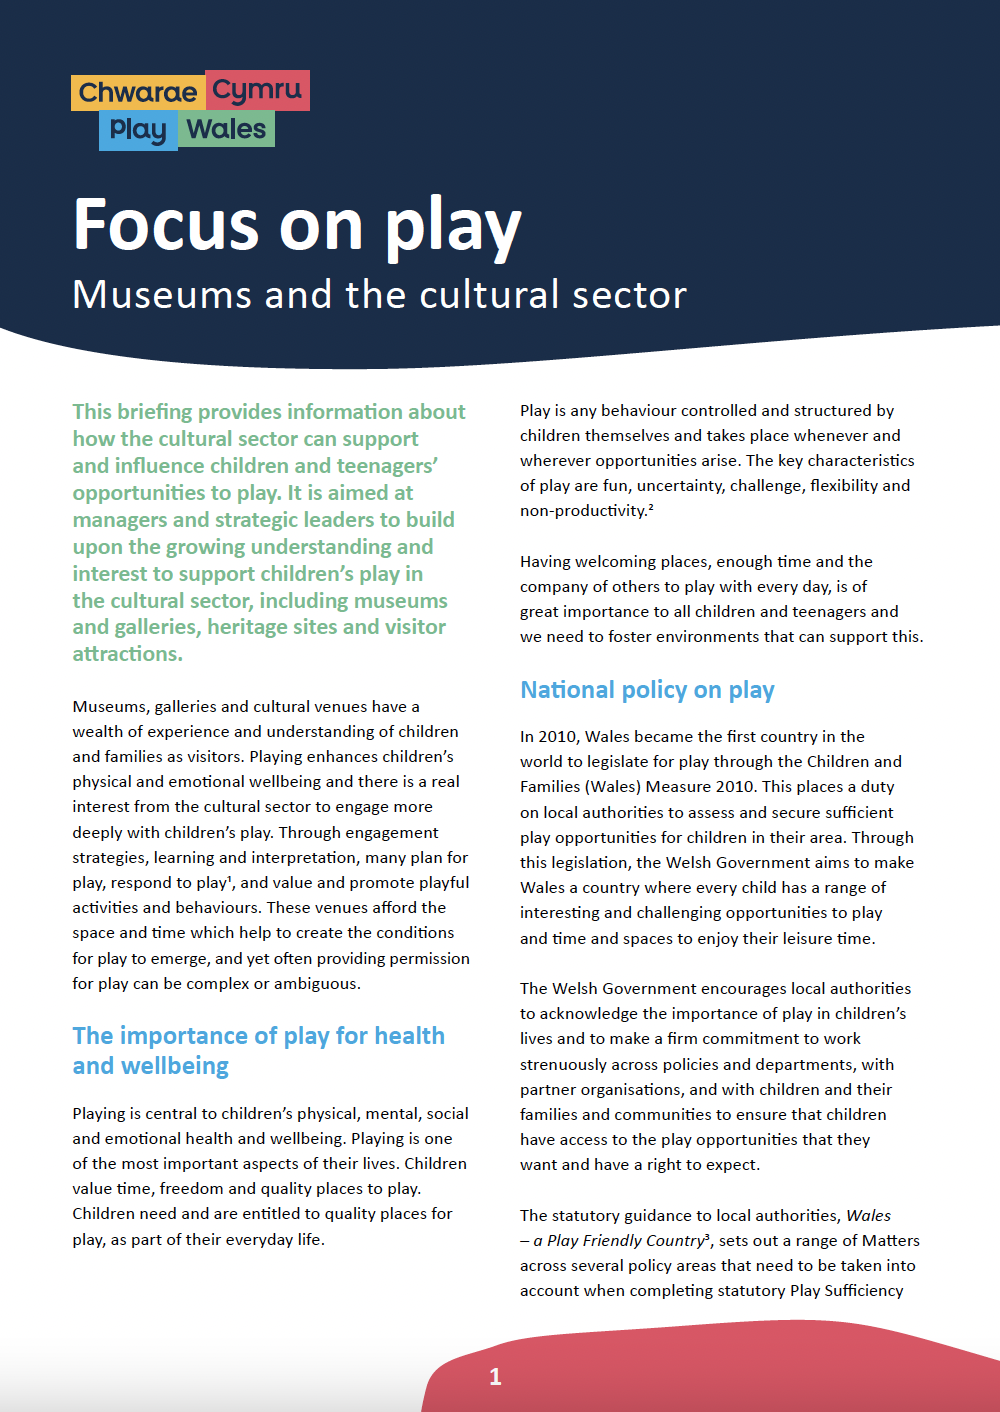 Focus on play – Museums and the cultural sector